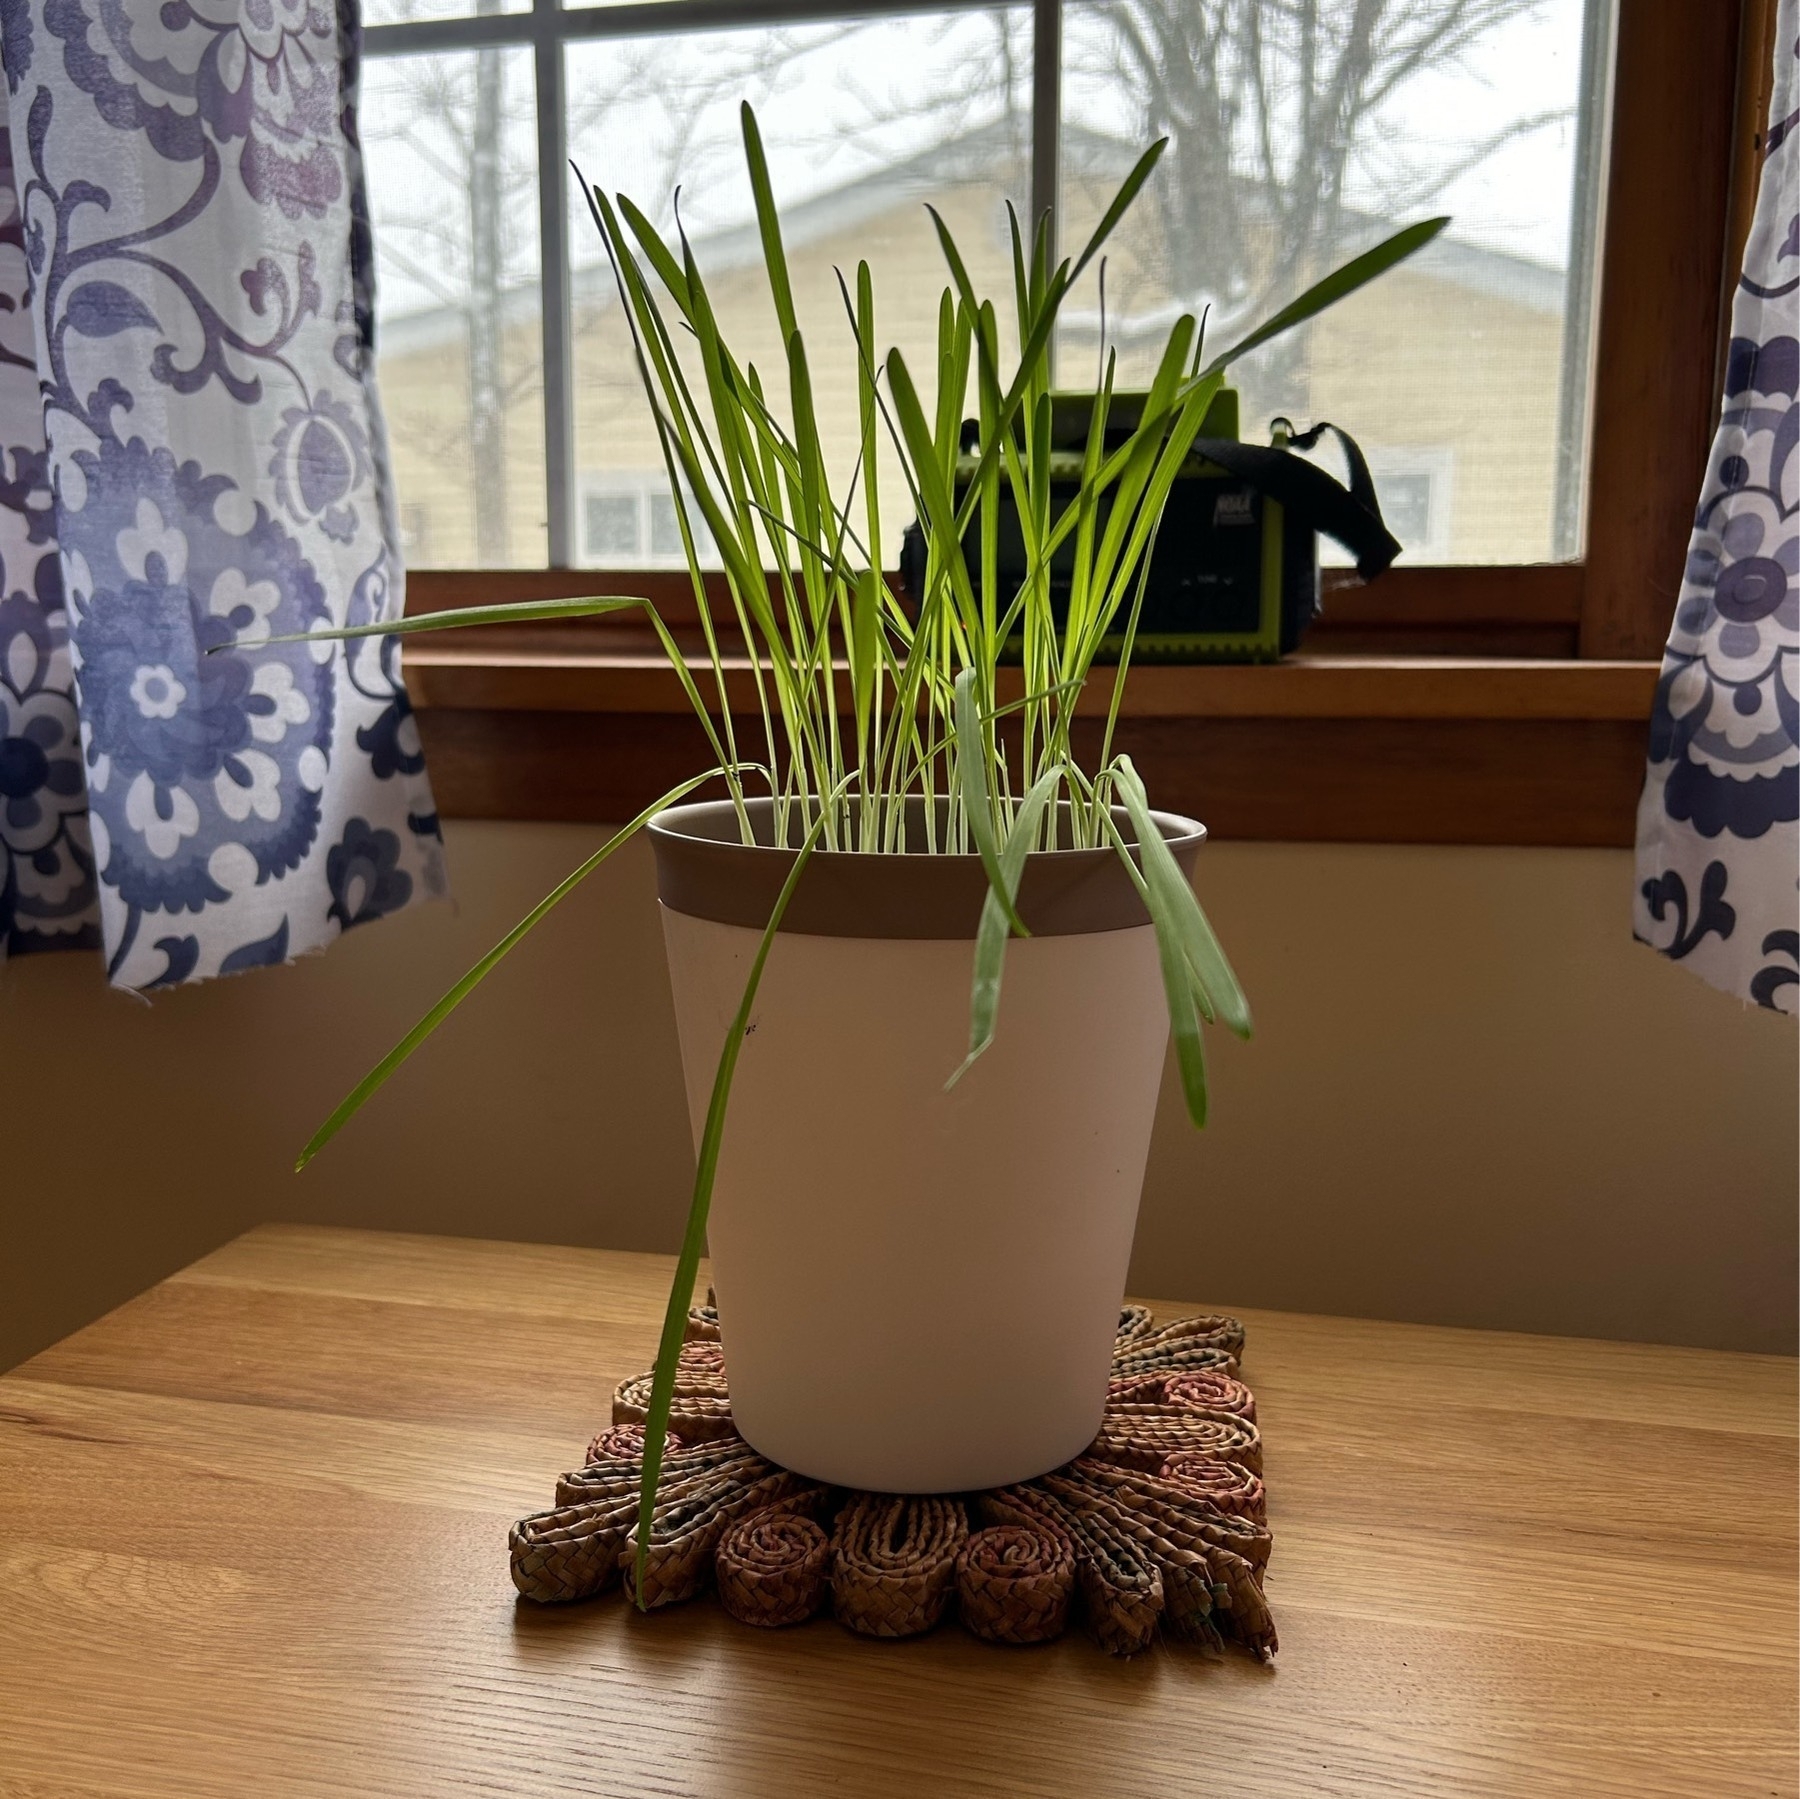 Grass sprouting out of a plastic pot on a wooden table with a window in the background.